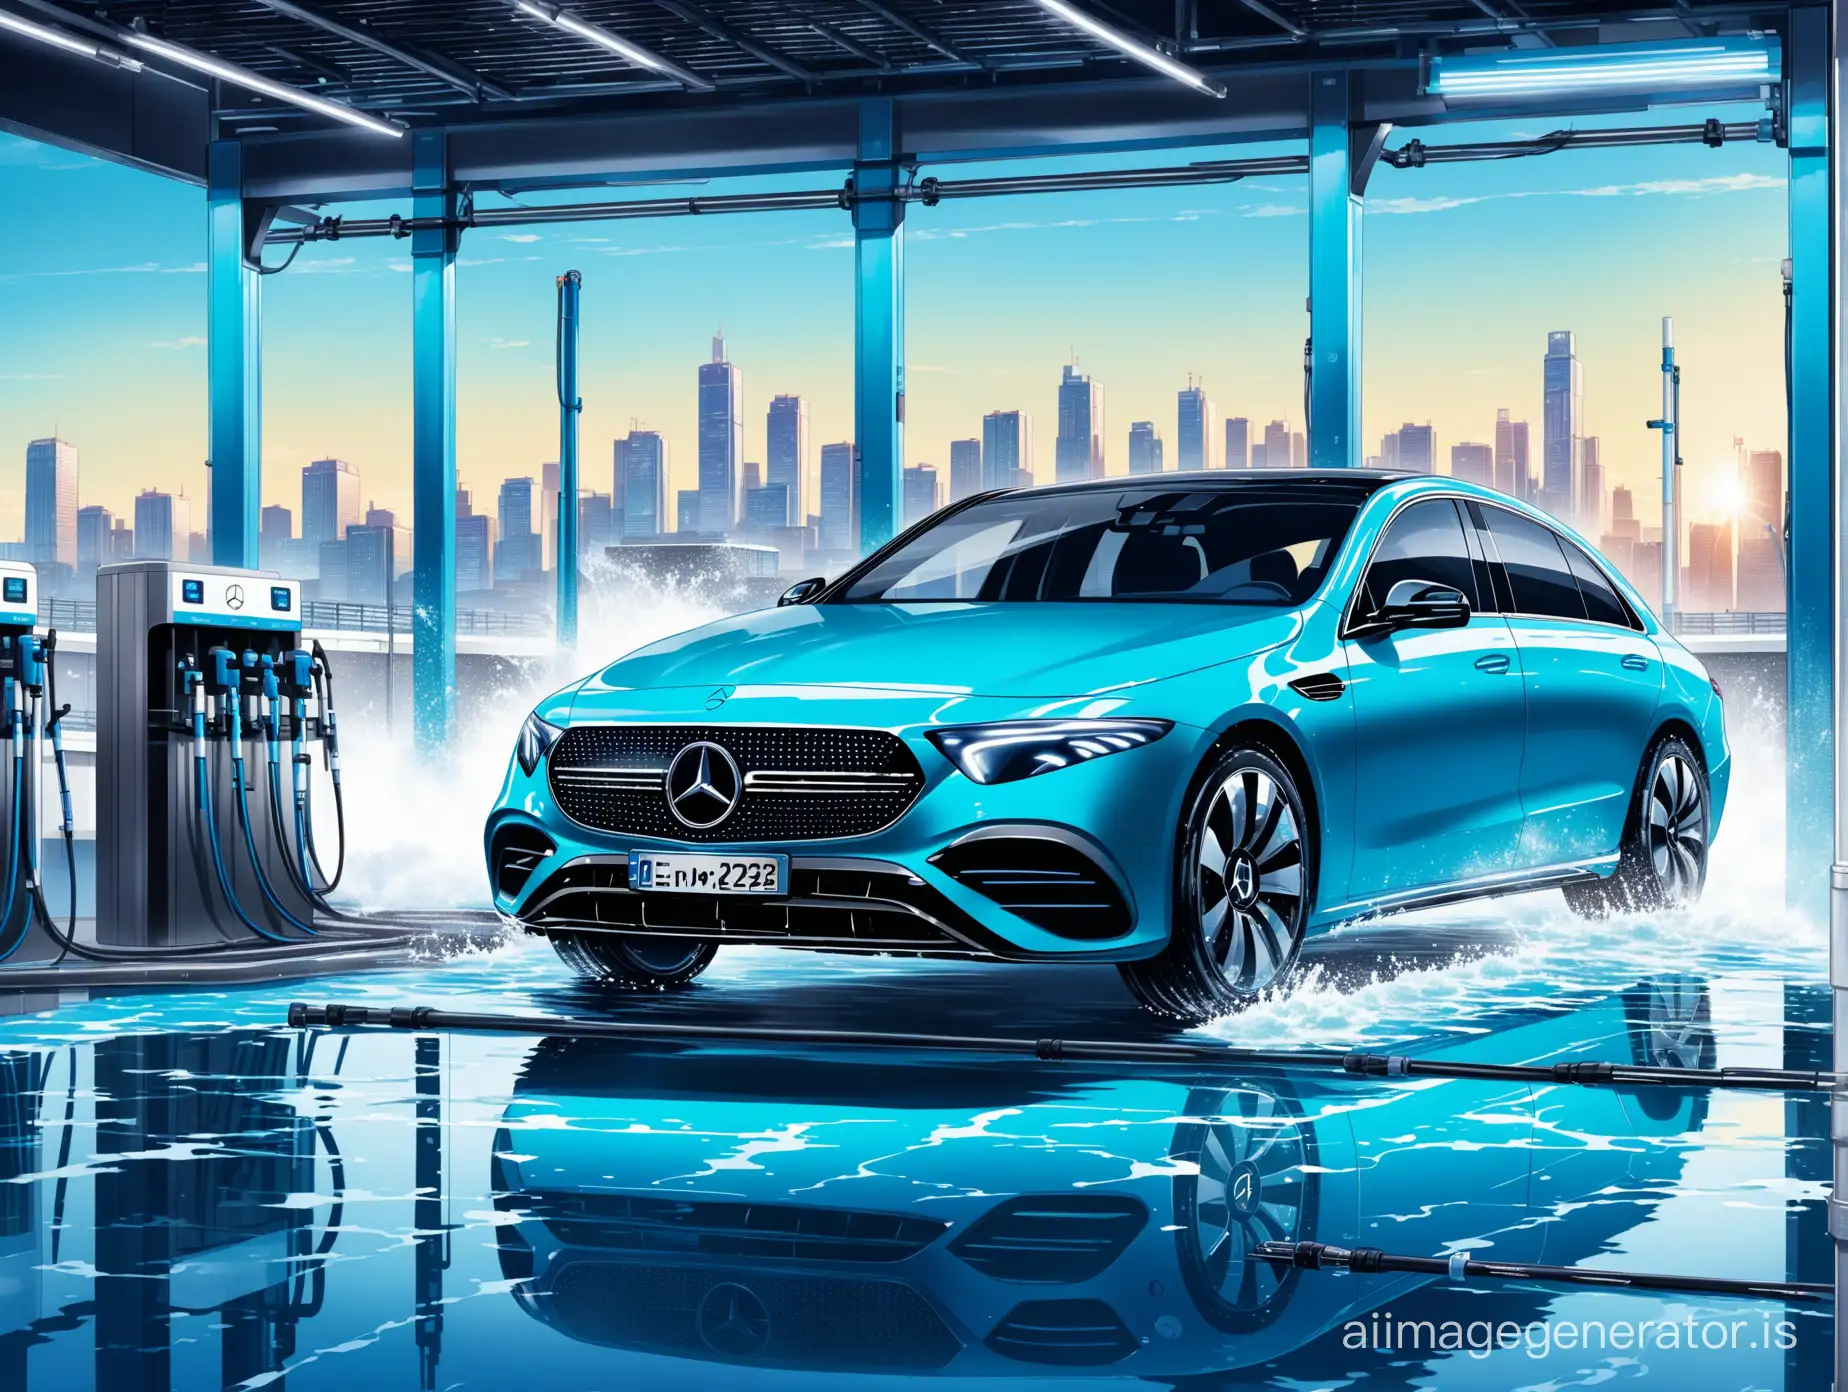 mercedes-benz EQE vehicle centrally positioned in a car wash with brushes and water pipes, blue color theme, with a city skyline in the back